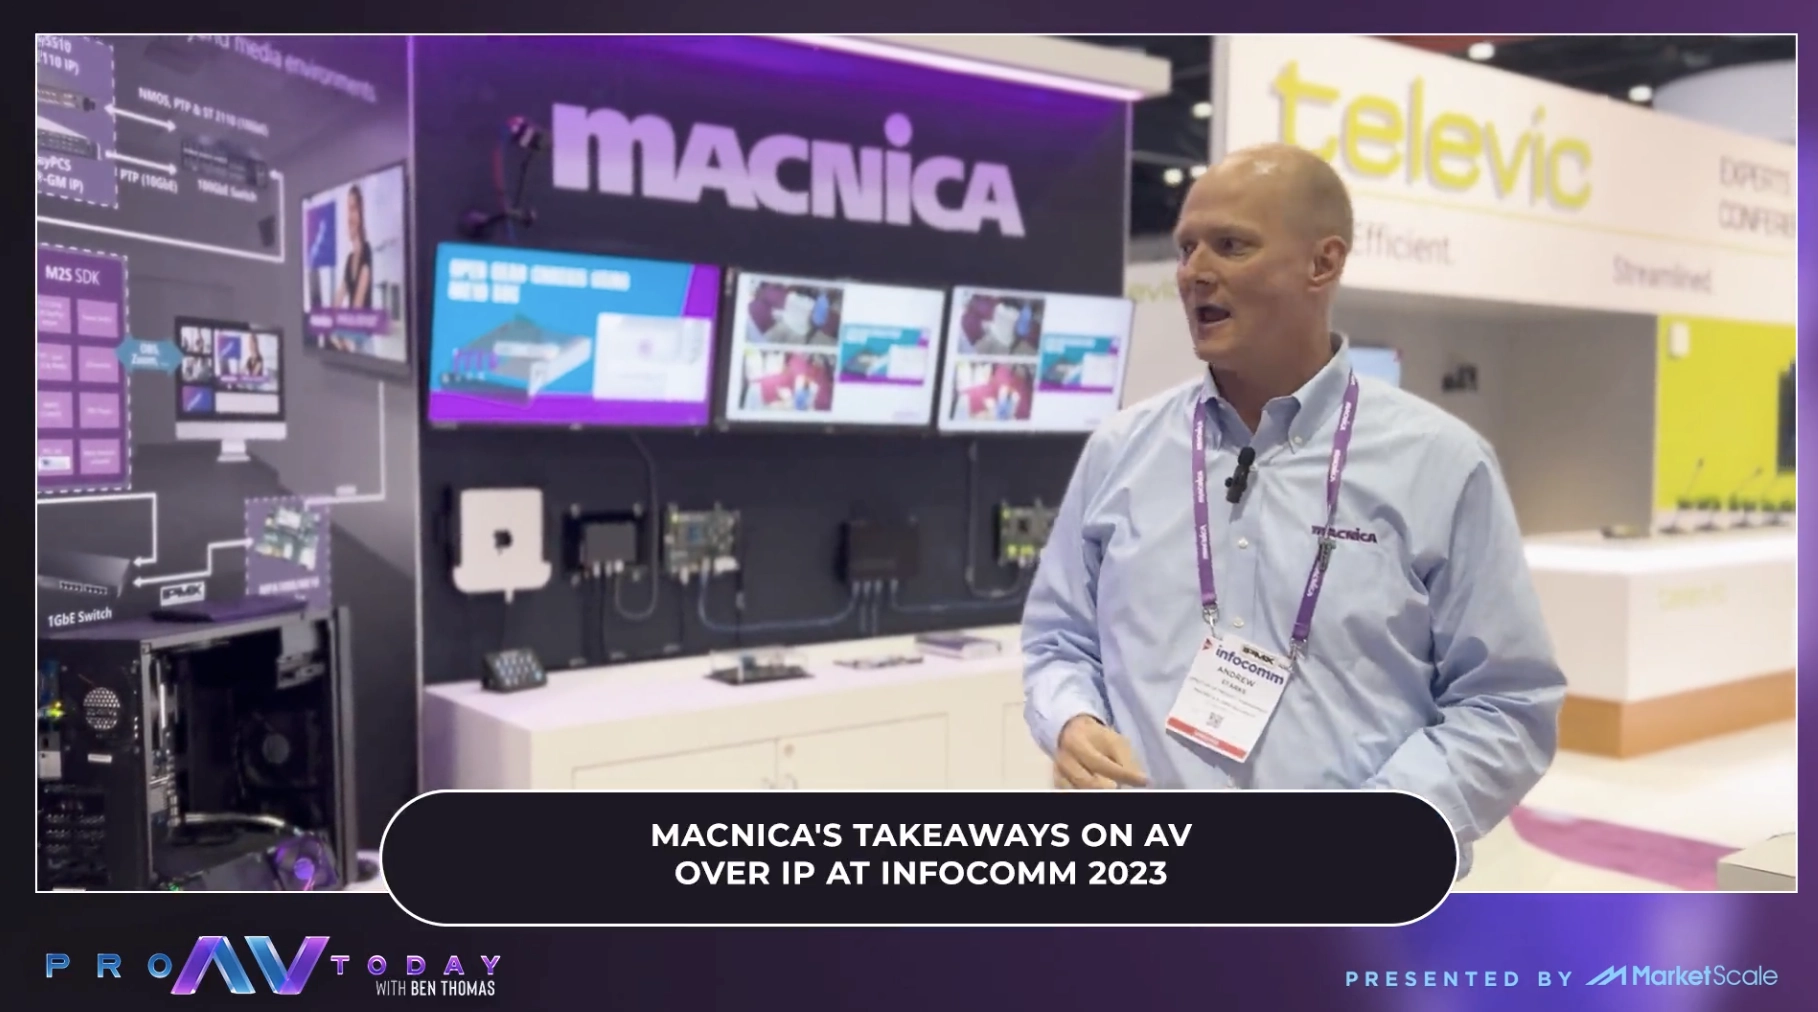 InfoComm 2023: Developers Direct Sights on AV Over IP Because Integrative Tools are Helping Create New Software